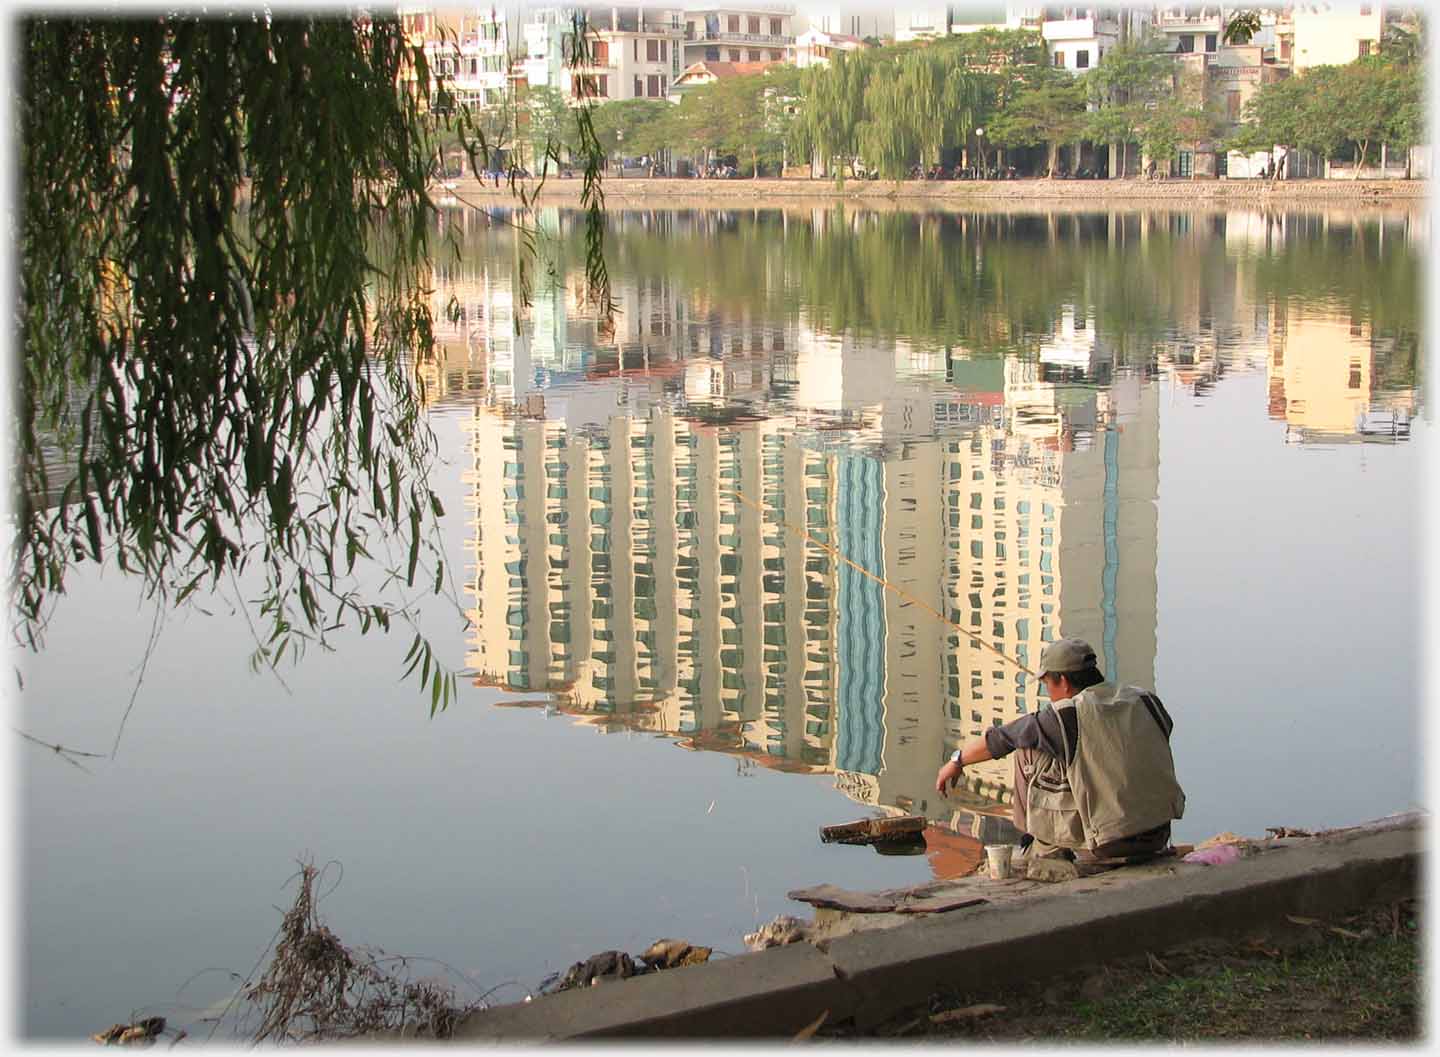 Man fishing in water filled with reflection of multi-story building.